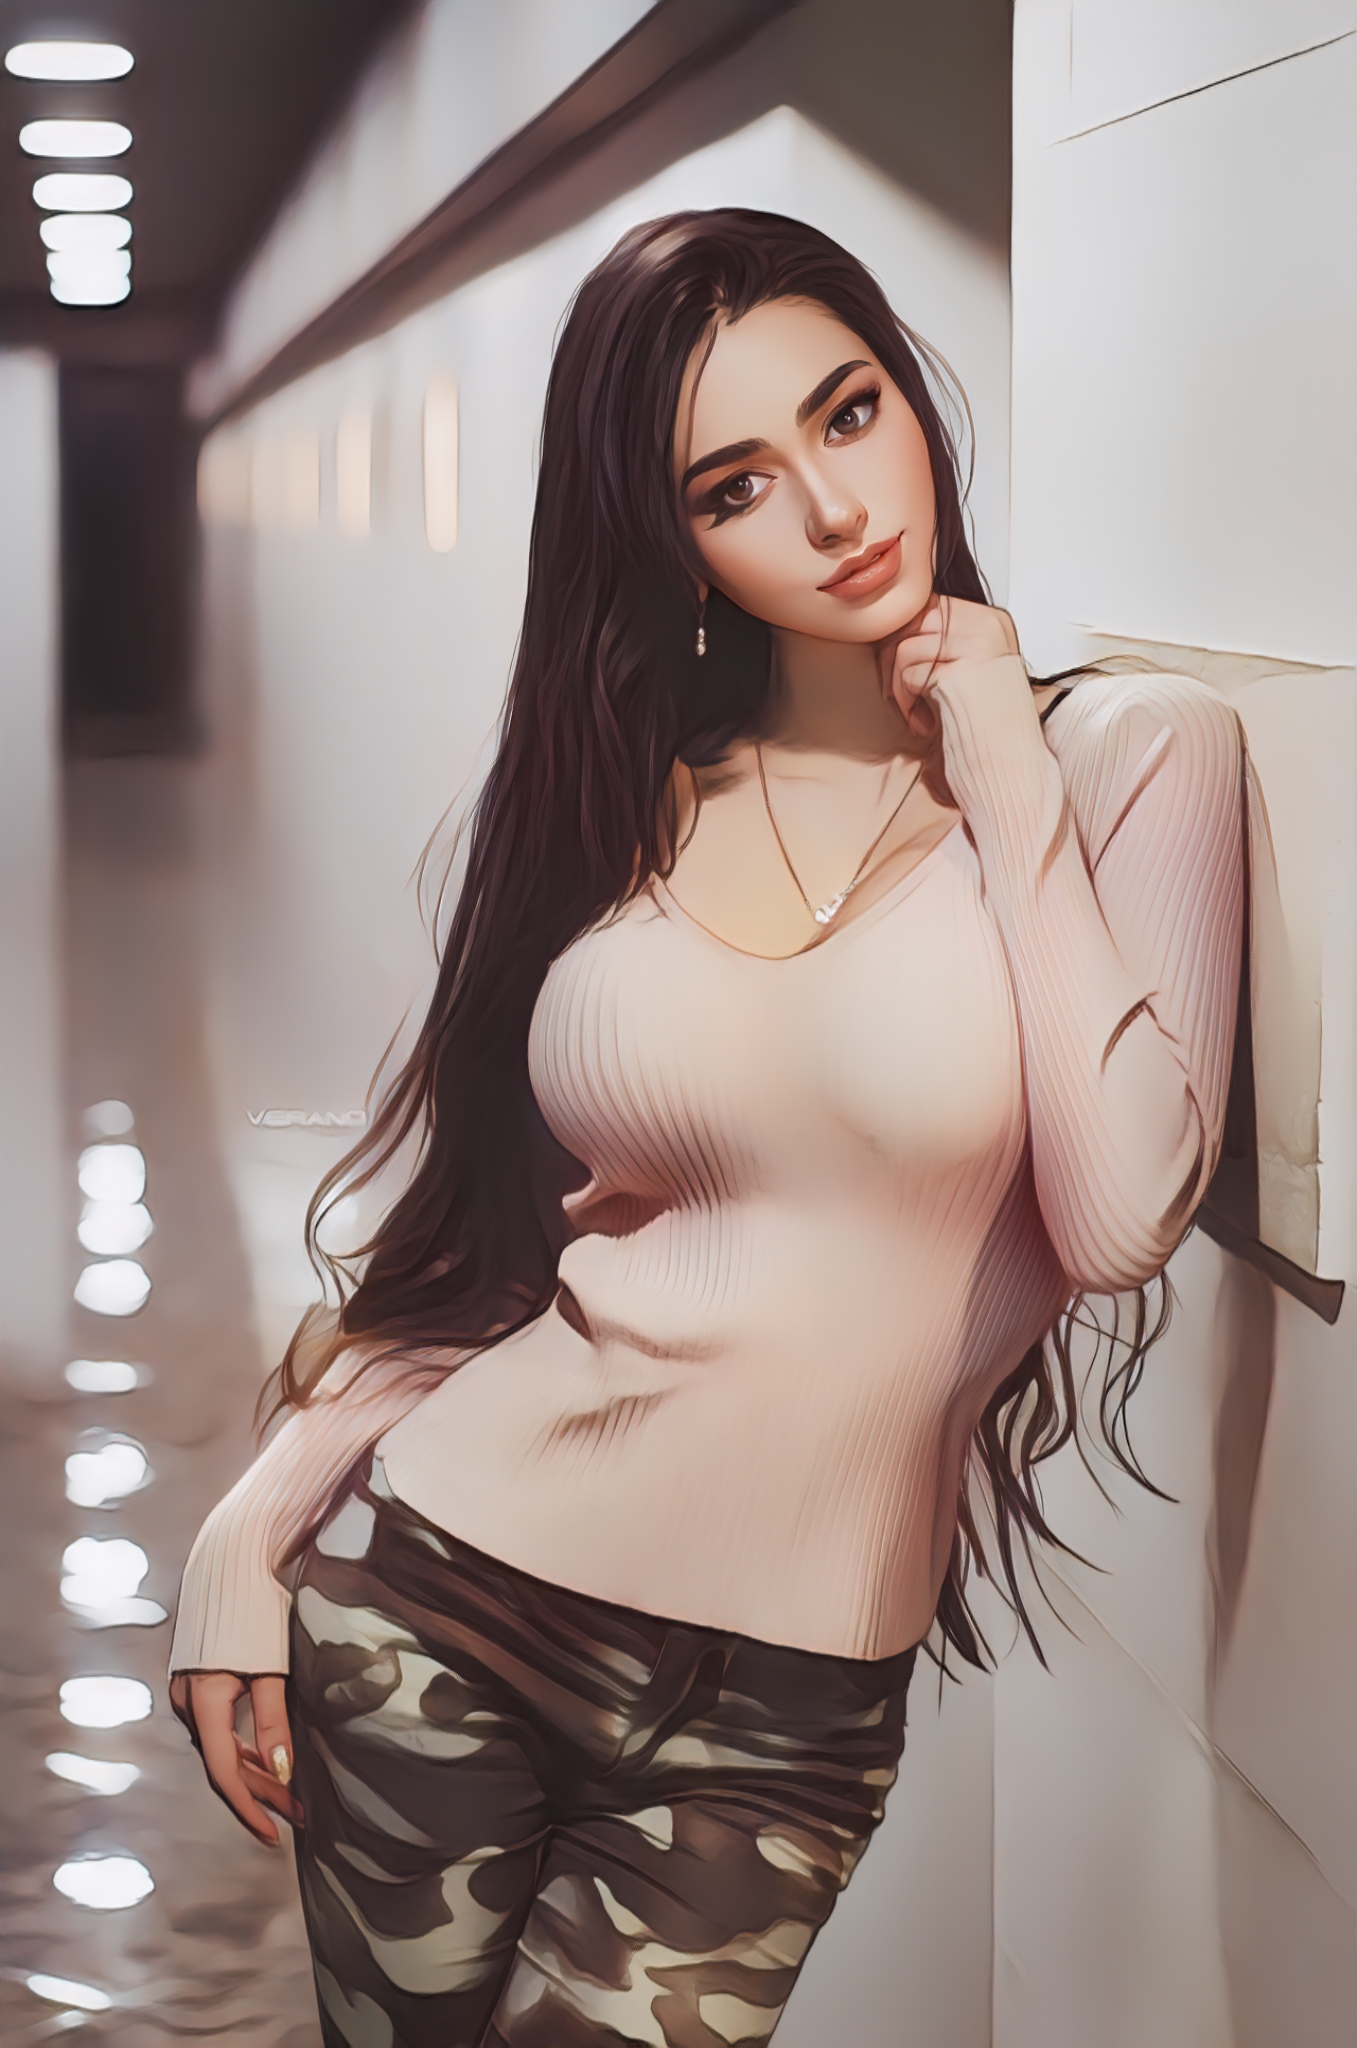 Model Looking At Viewer Women Digital Art Vertical Necklace Long Hair Photoshopped 1357x2048